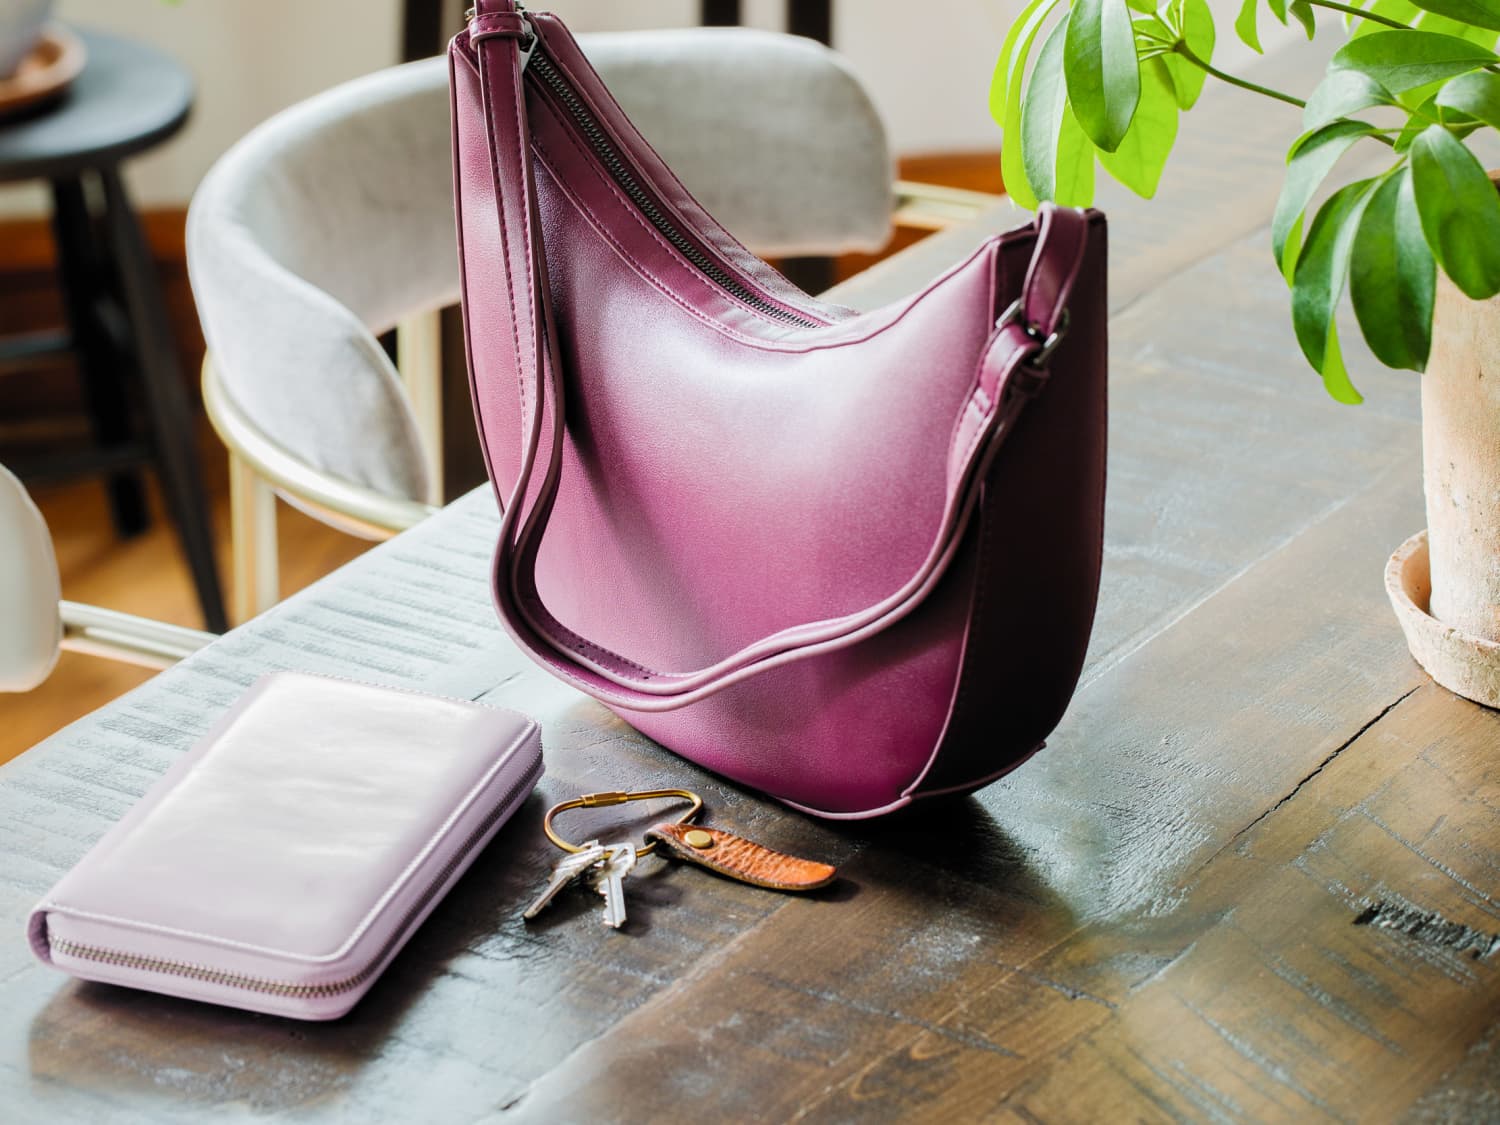 I'm a professional handbag restorer - my tips on how to clean your  tired-looking purse at home without spending a penny